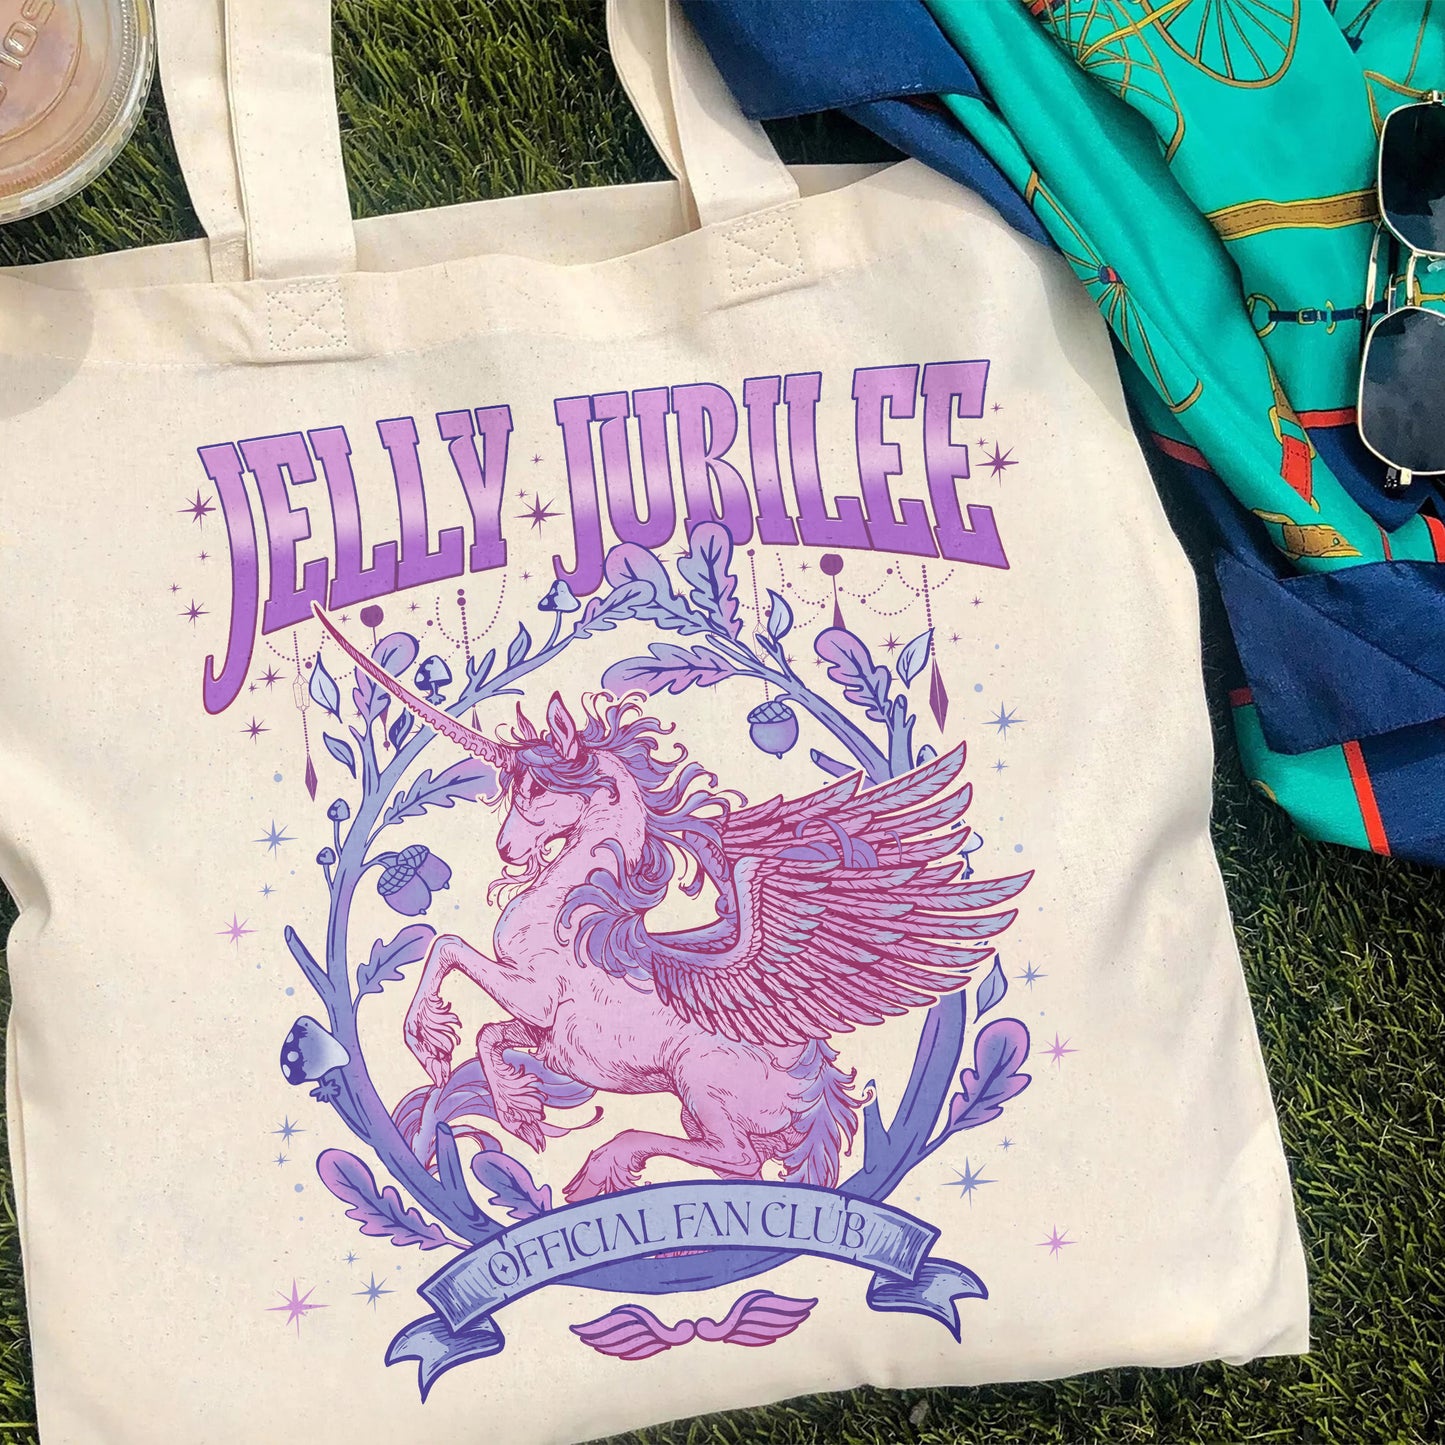 Jelly Jubilee Crescent City Tote Bag, Crescent City Jelly Jubilee Tote Bag